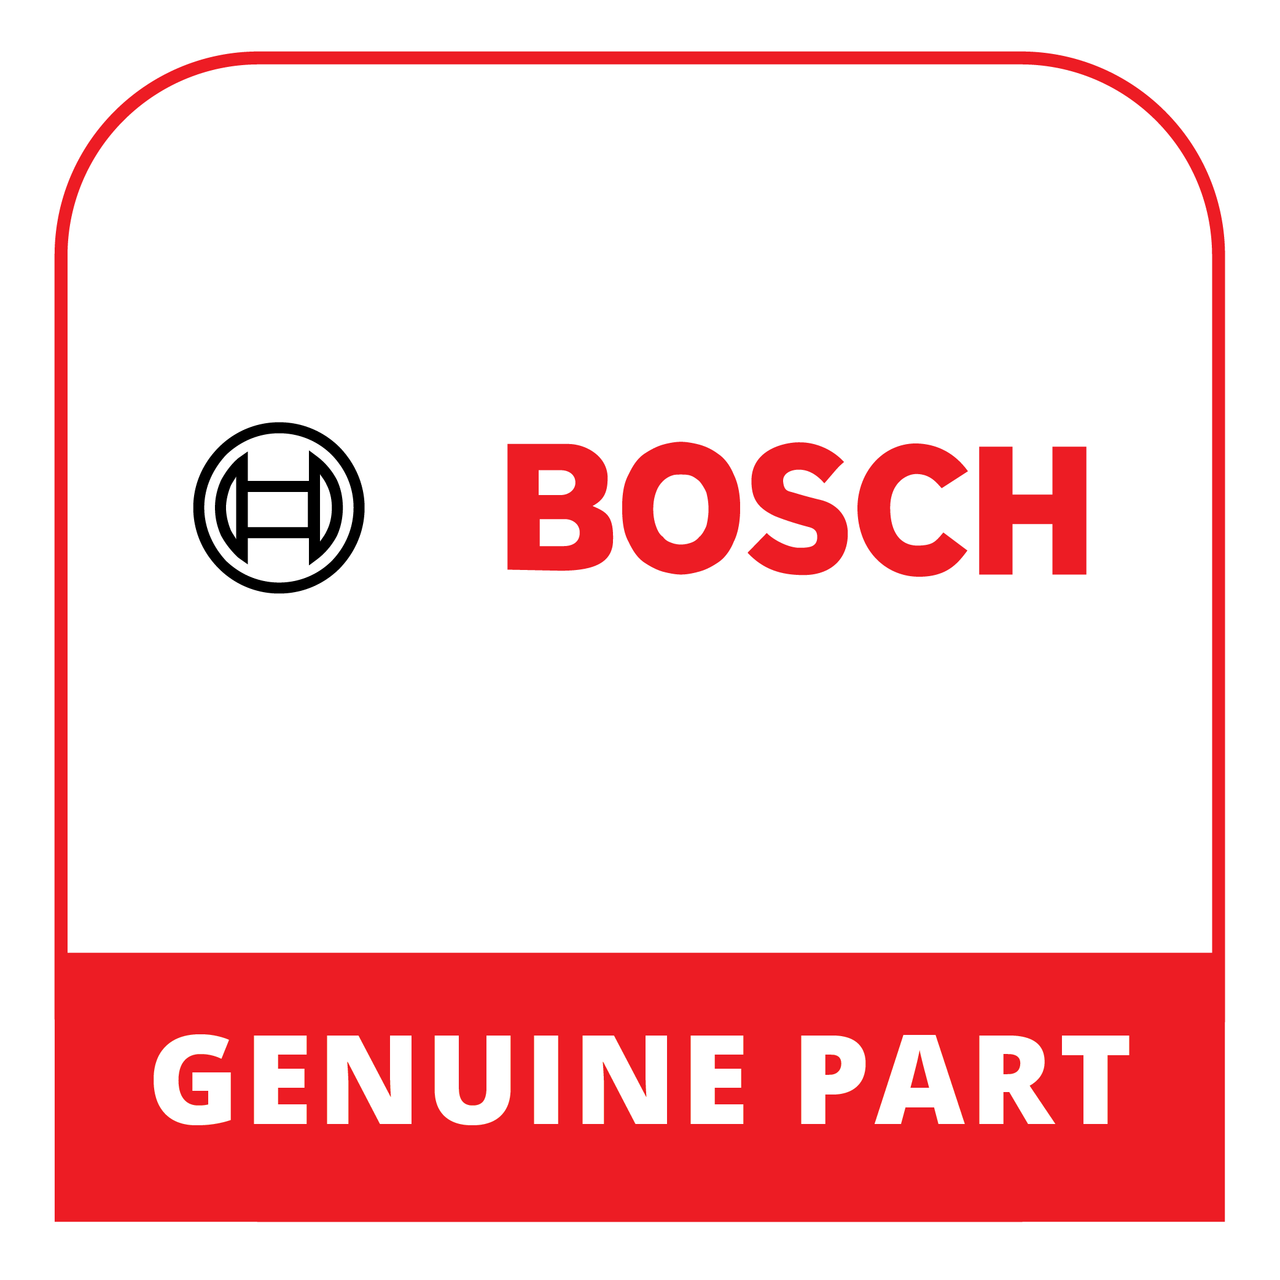 Bosch (Thermador) 11056363 - Hot-Air Guide Plate - Genuine Bosch (Thermador) Part